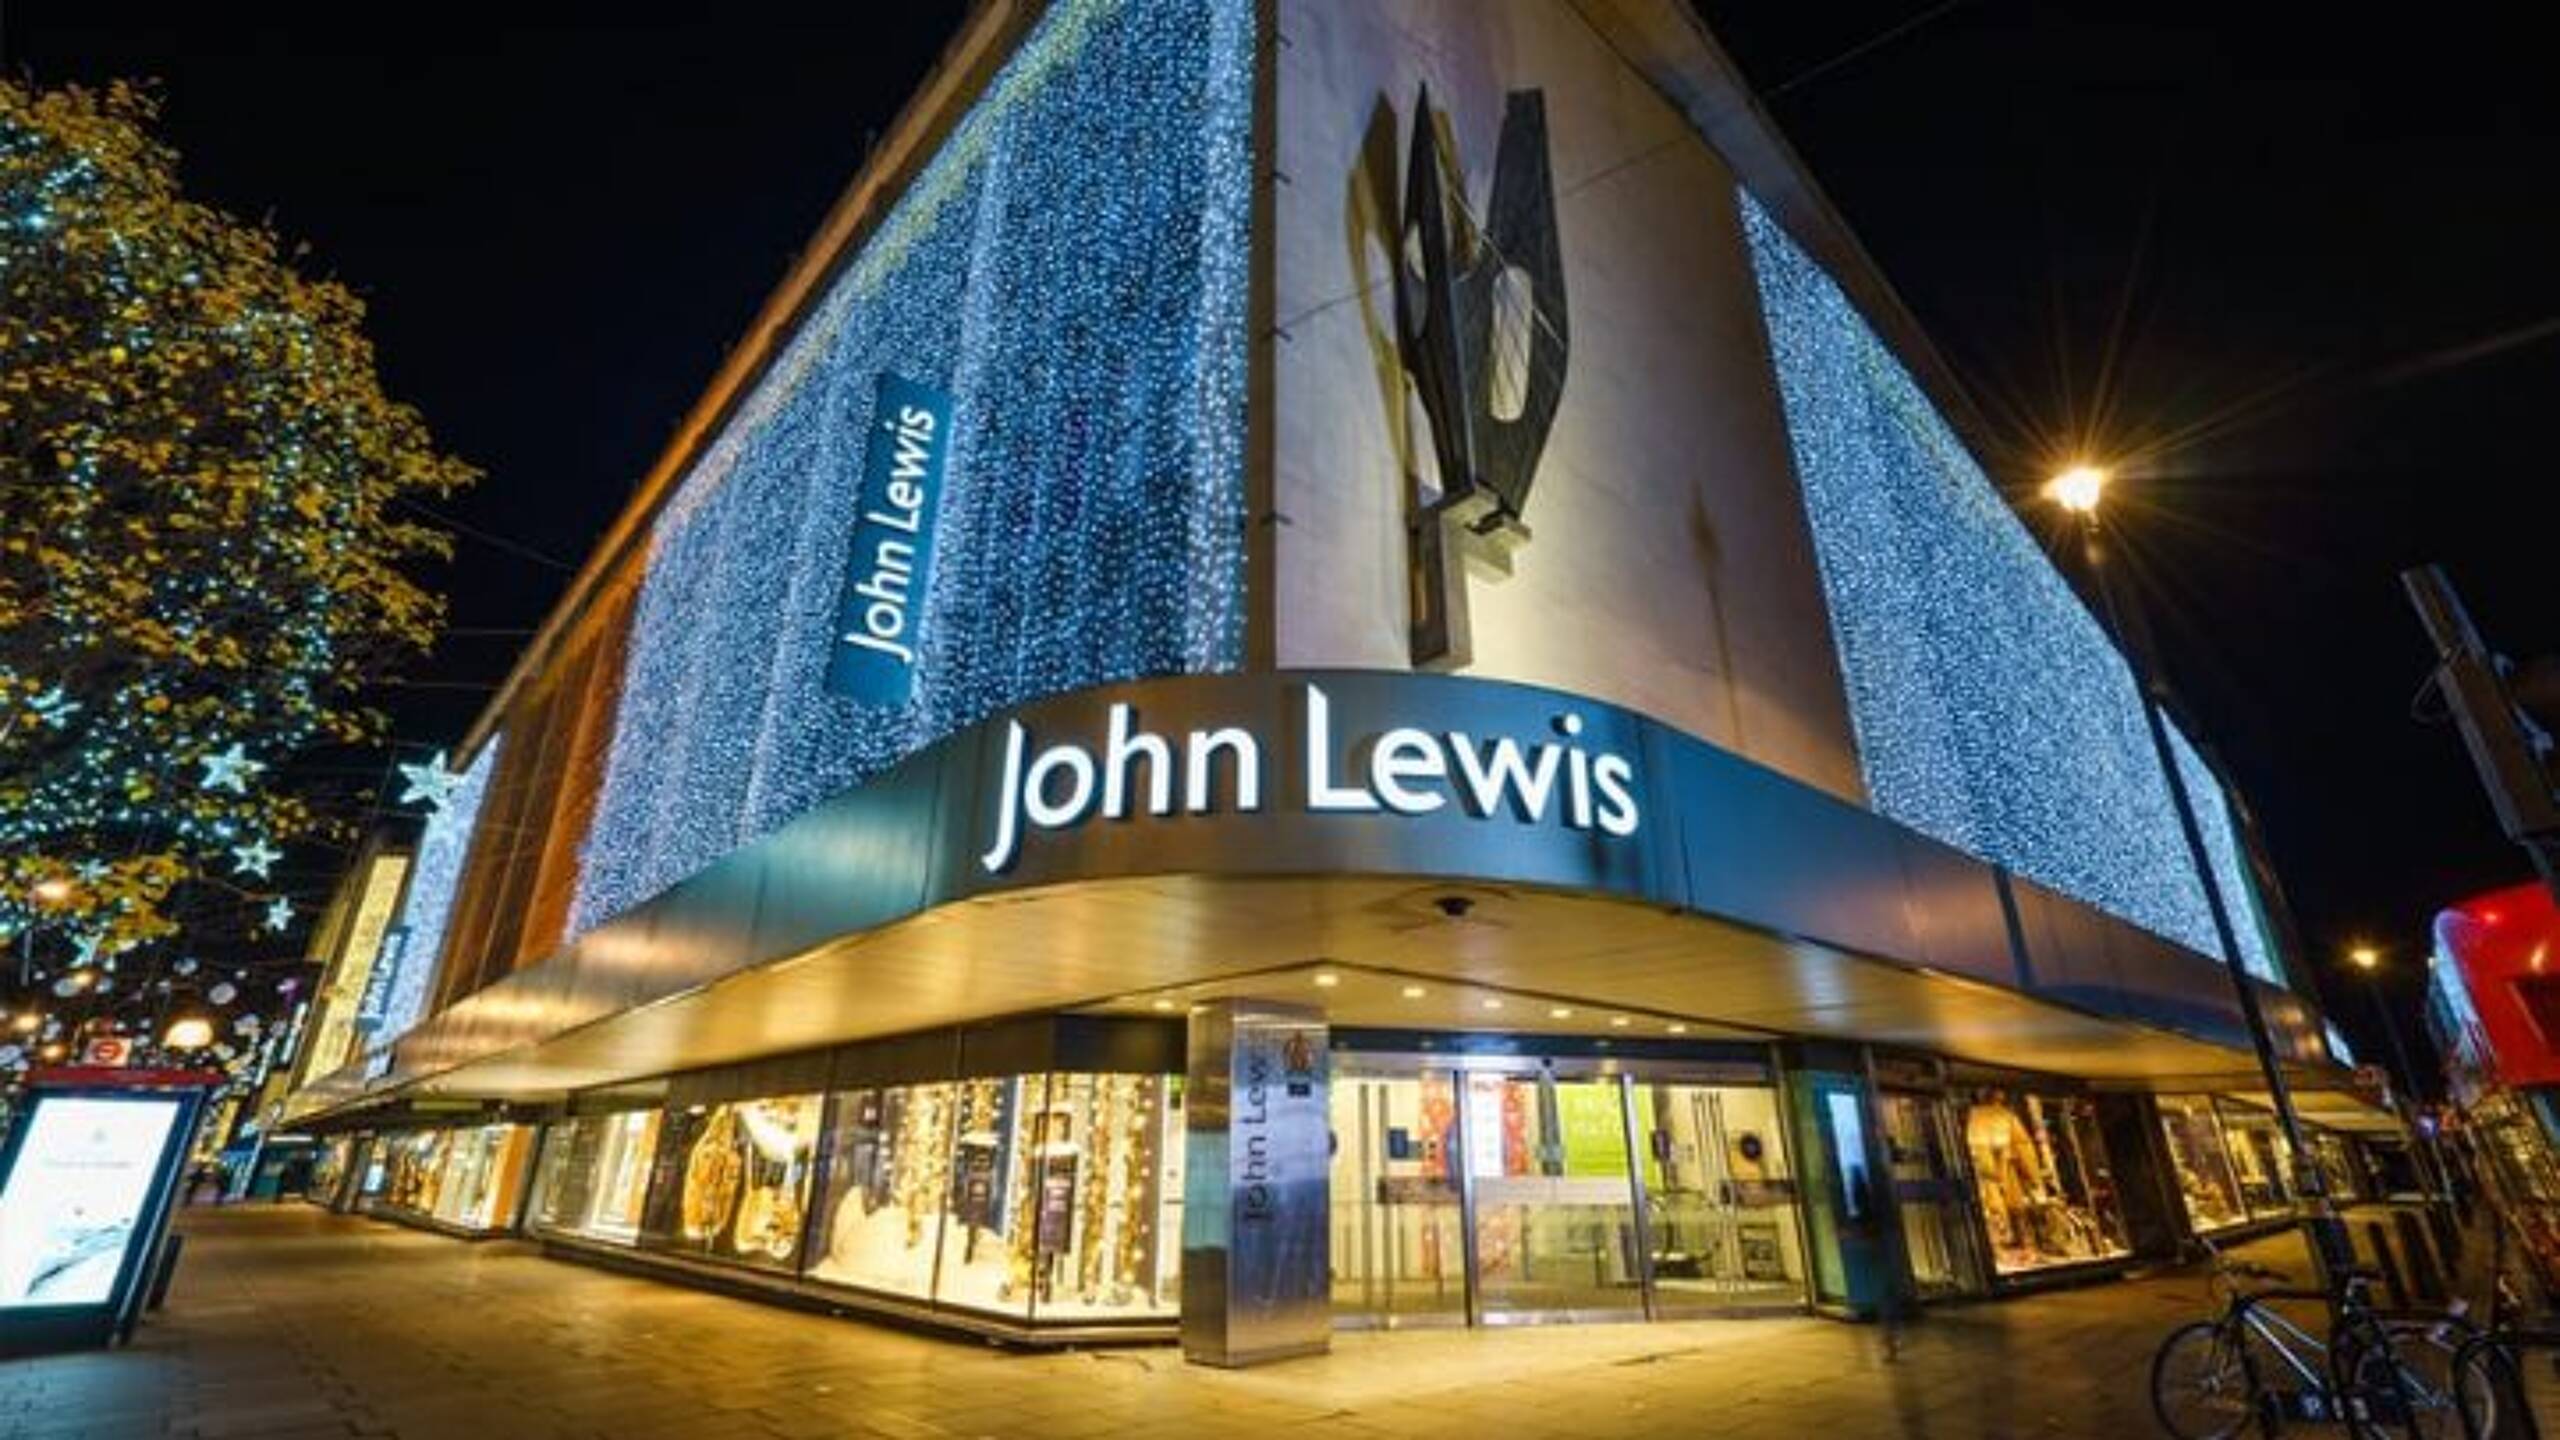 John Lewis applies for water self-supply licence in first for UK retail